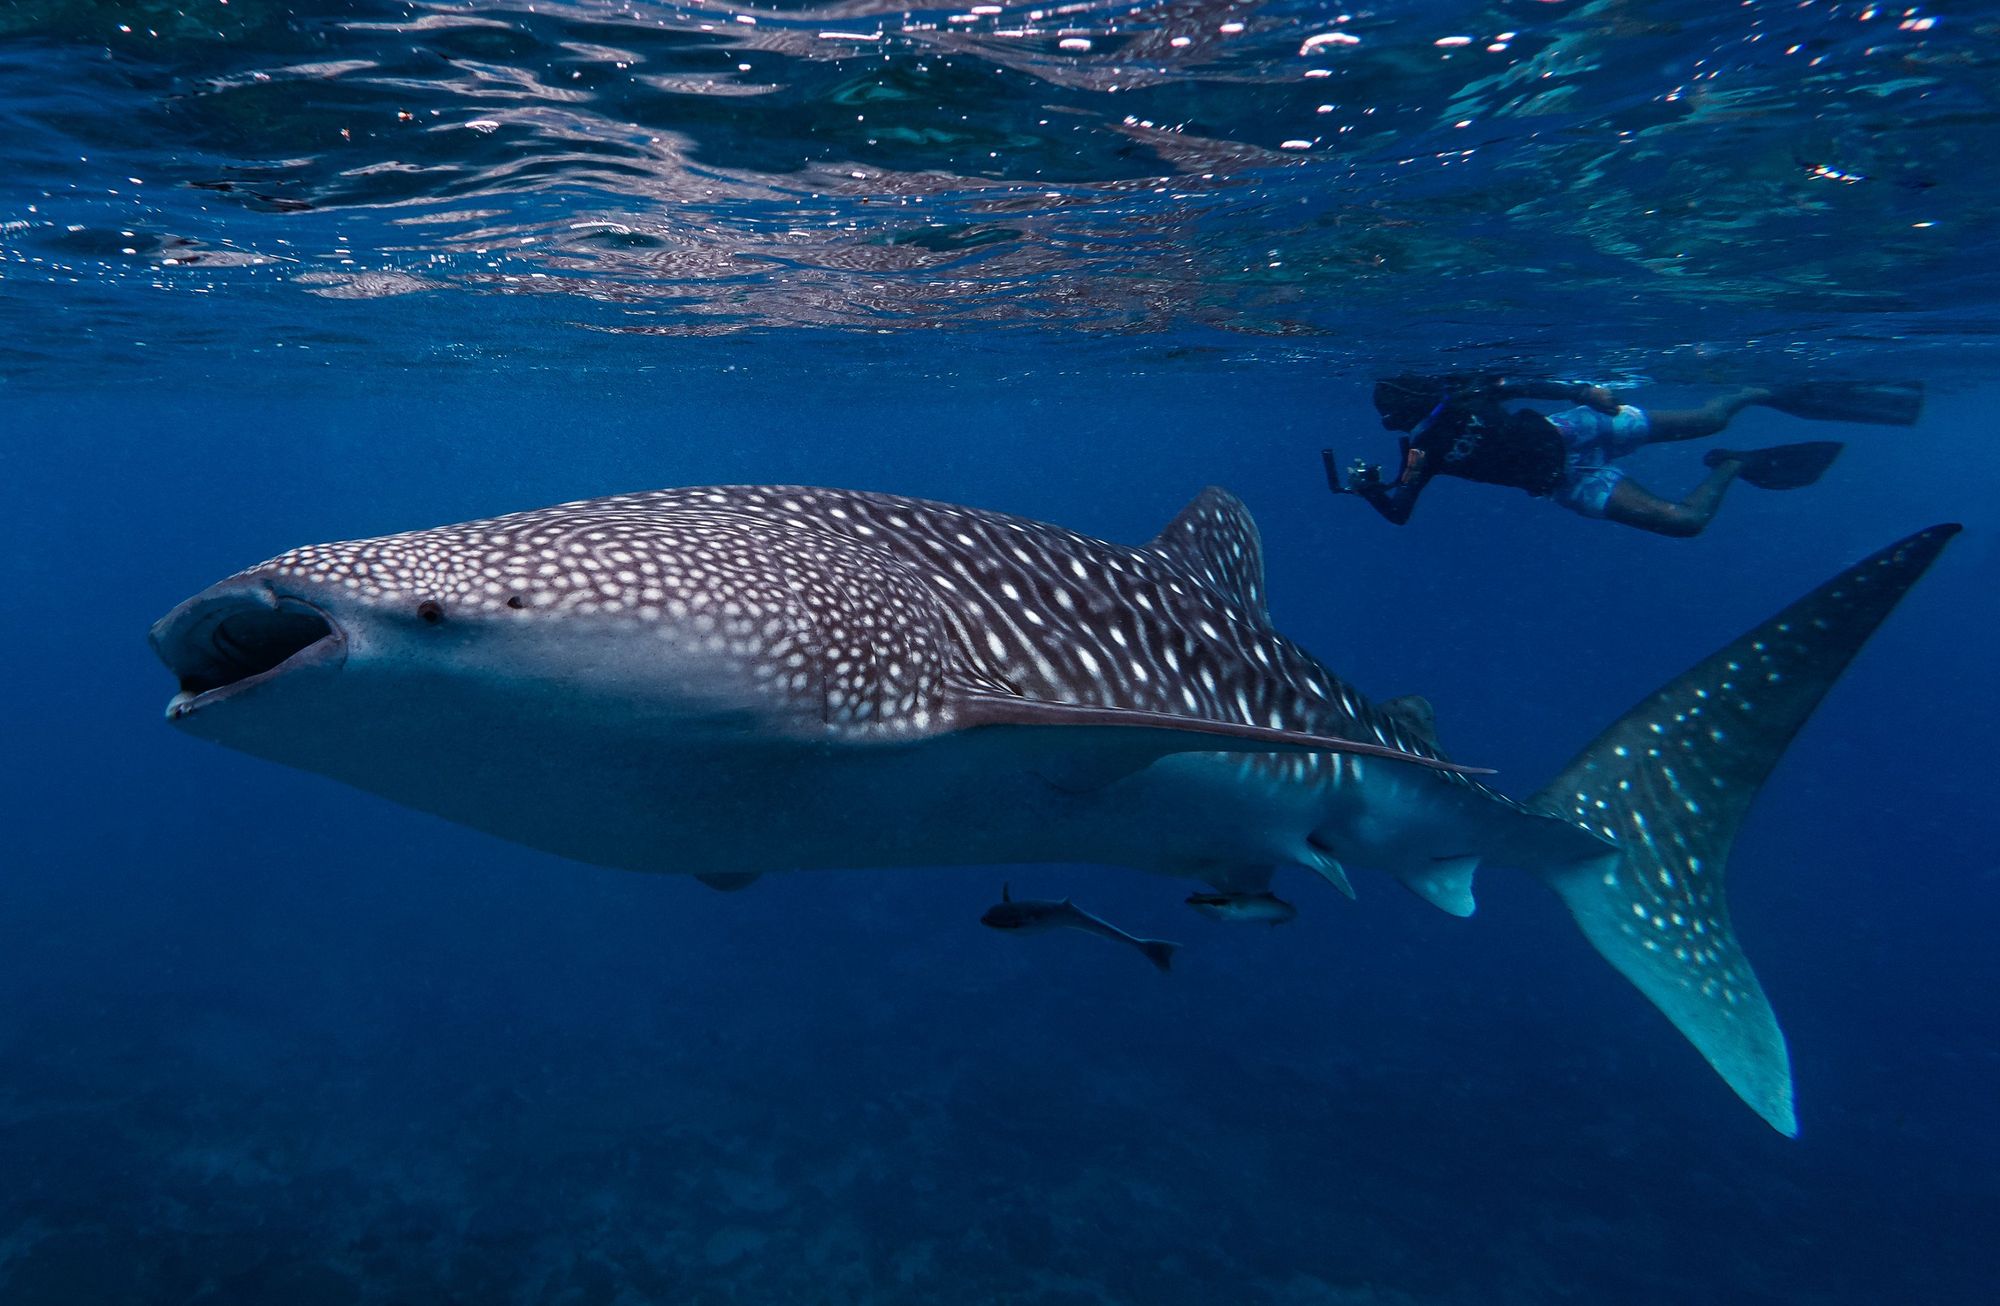 The enormous whale sharks are one of the biggest pulls to visit the Maldives.